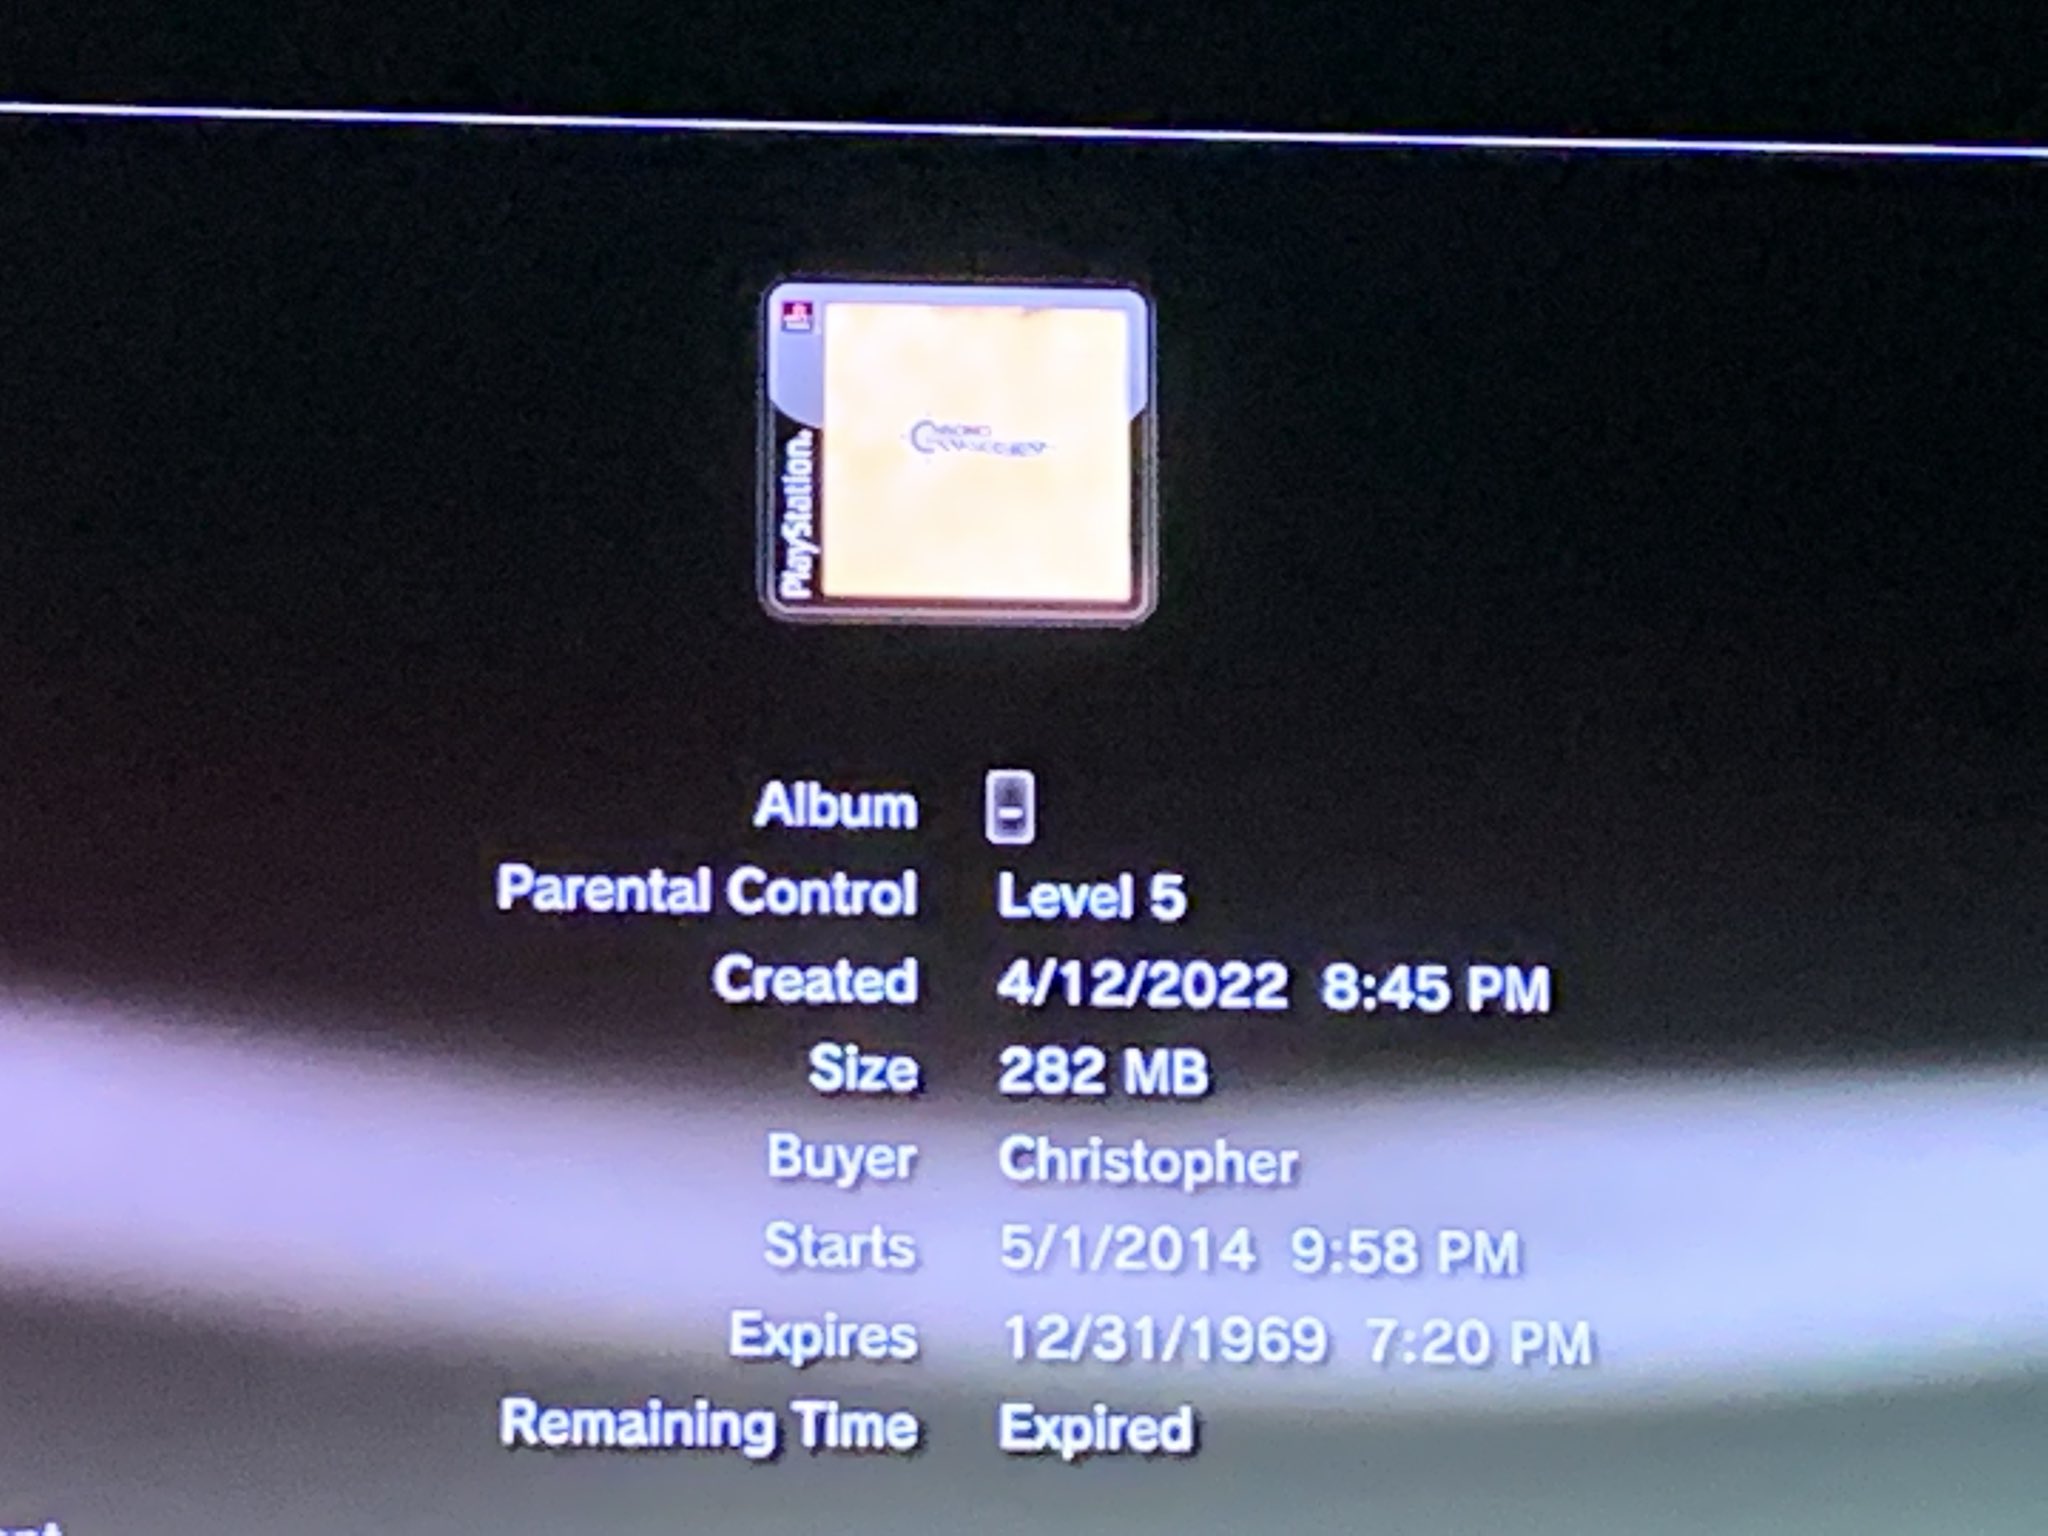 Christopher Foose on Twitter: "So did @PlayStation expire the PSOne  Classics versions of #ChronoCross and #ChronoTrigger by setting the date on  new downloads to 12/31/1969? This is preventing me from playing my